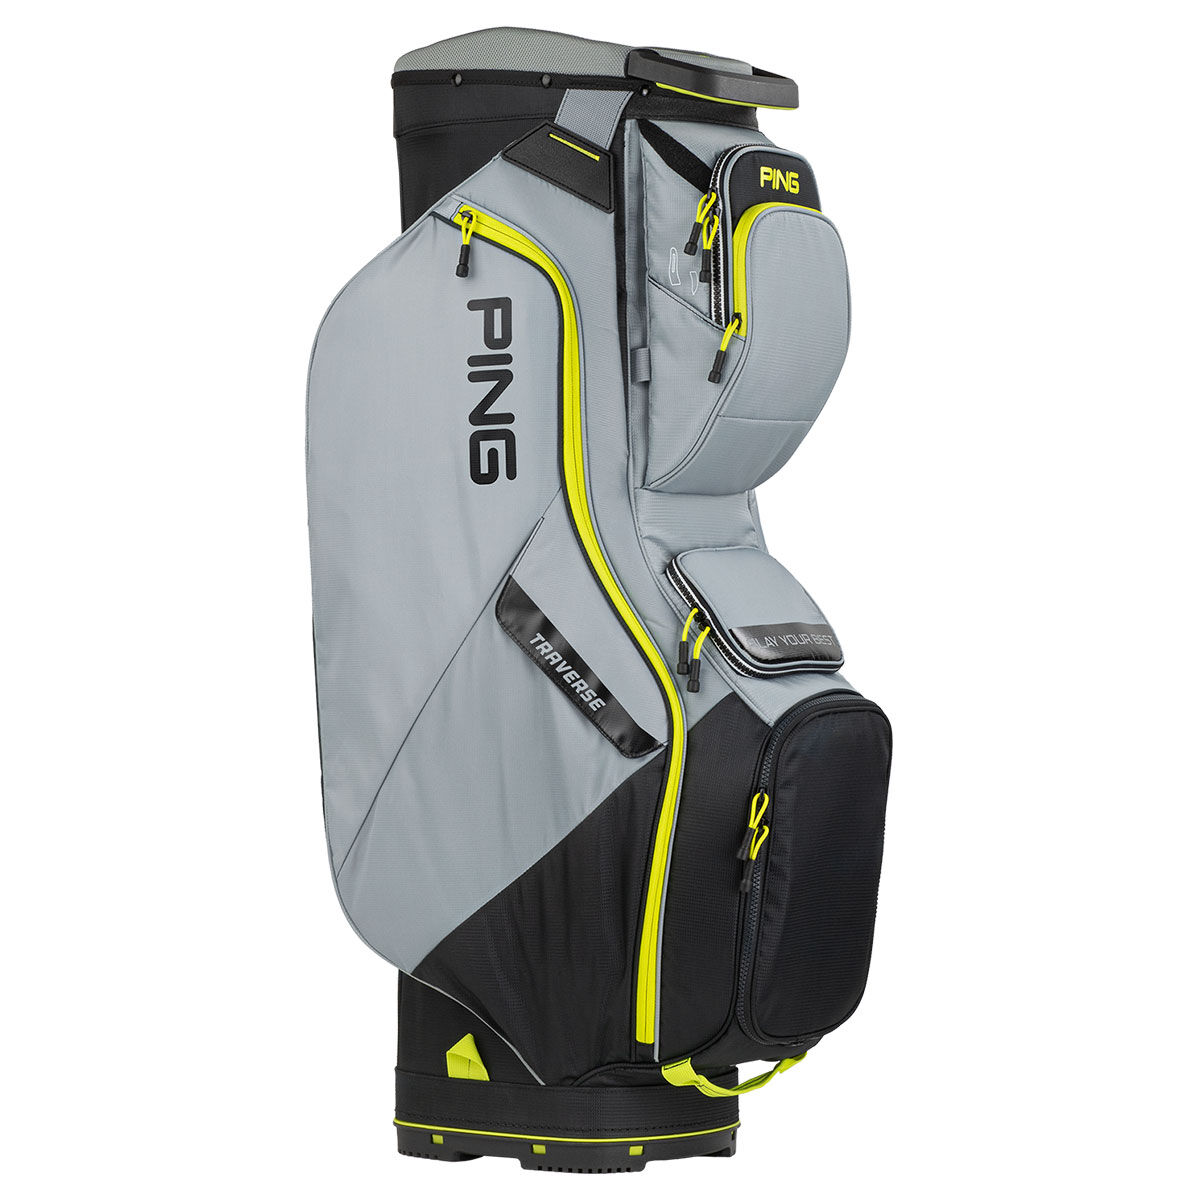 Ping Black, Grey and Yellow Lightweight Traverse Golf Cart Bag | American Golf, One Size